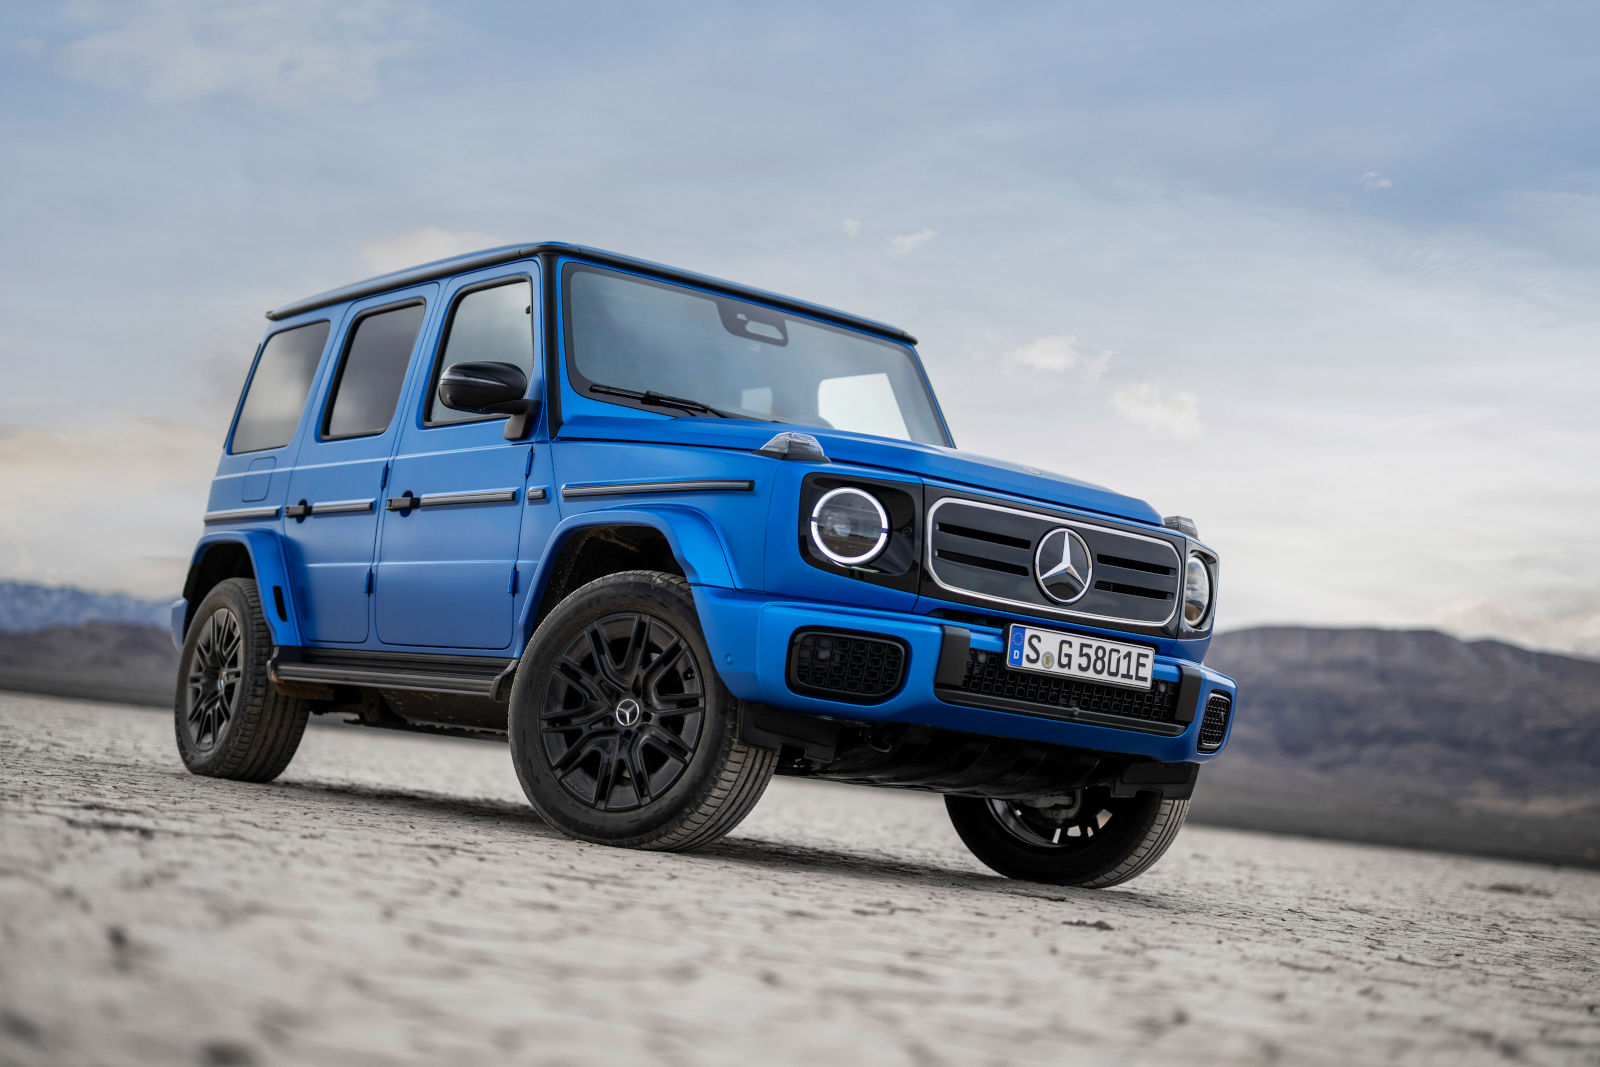 All-new electric Mercedes-Benz G-Class unveiled: The legend has evolved